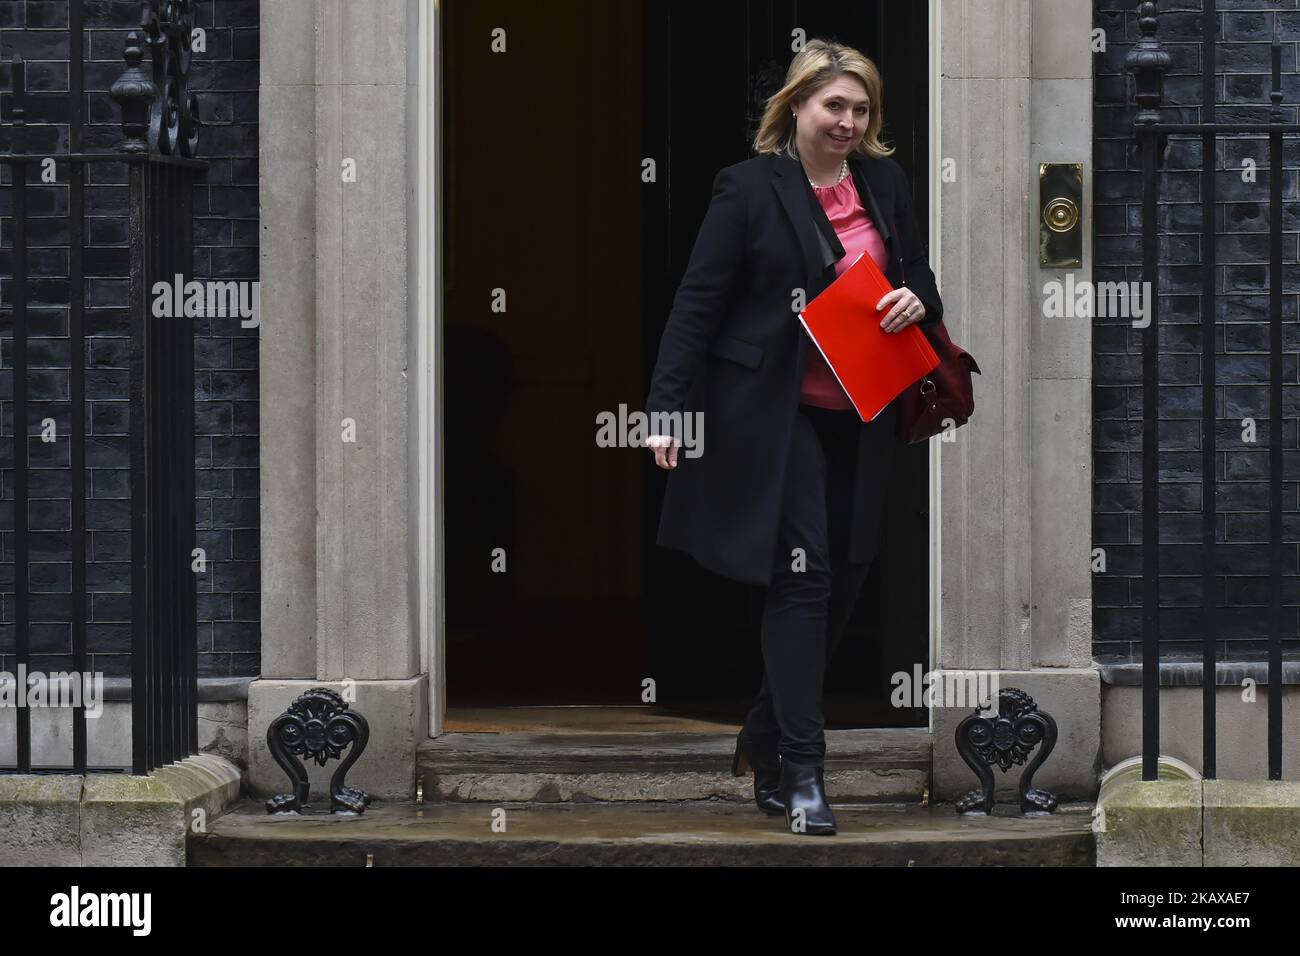 Secretary of State for Northern Ireland Karen Bradley leaves 10 Downing Street after attending the weekly Cabinet Meeting, London on March 27, 2018. Prime Minister Theresa May is facing another Brexit hurdle after the opposition Labour Party announced its pushing for a legal commitment to avoid a hard border with Ireland after Britain leaves the European Union. The Migration Advisory Committee (MAC) said businesses are concerned about their ability to recruit workers from the EU after Britain leaves the EU. UK employers also see EU workers as 'more reliable' and eager than their British counte Stock Photo